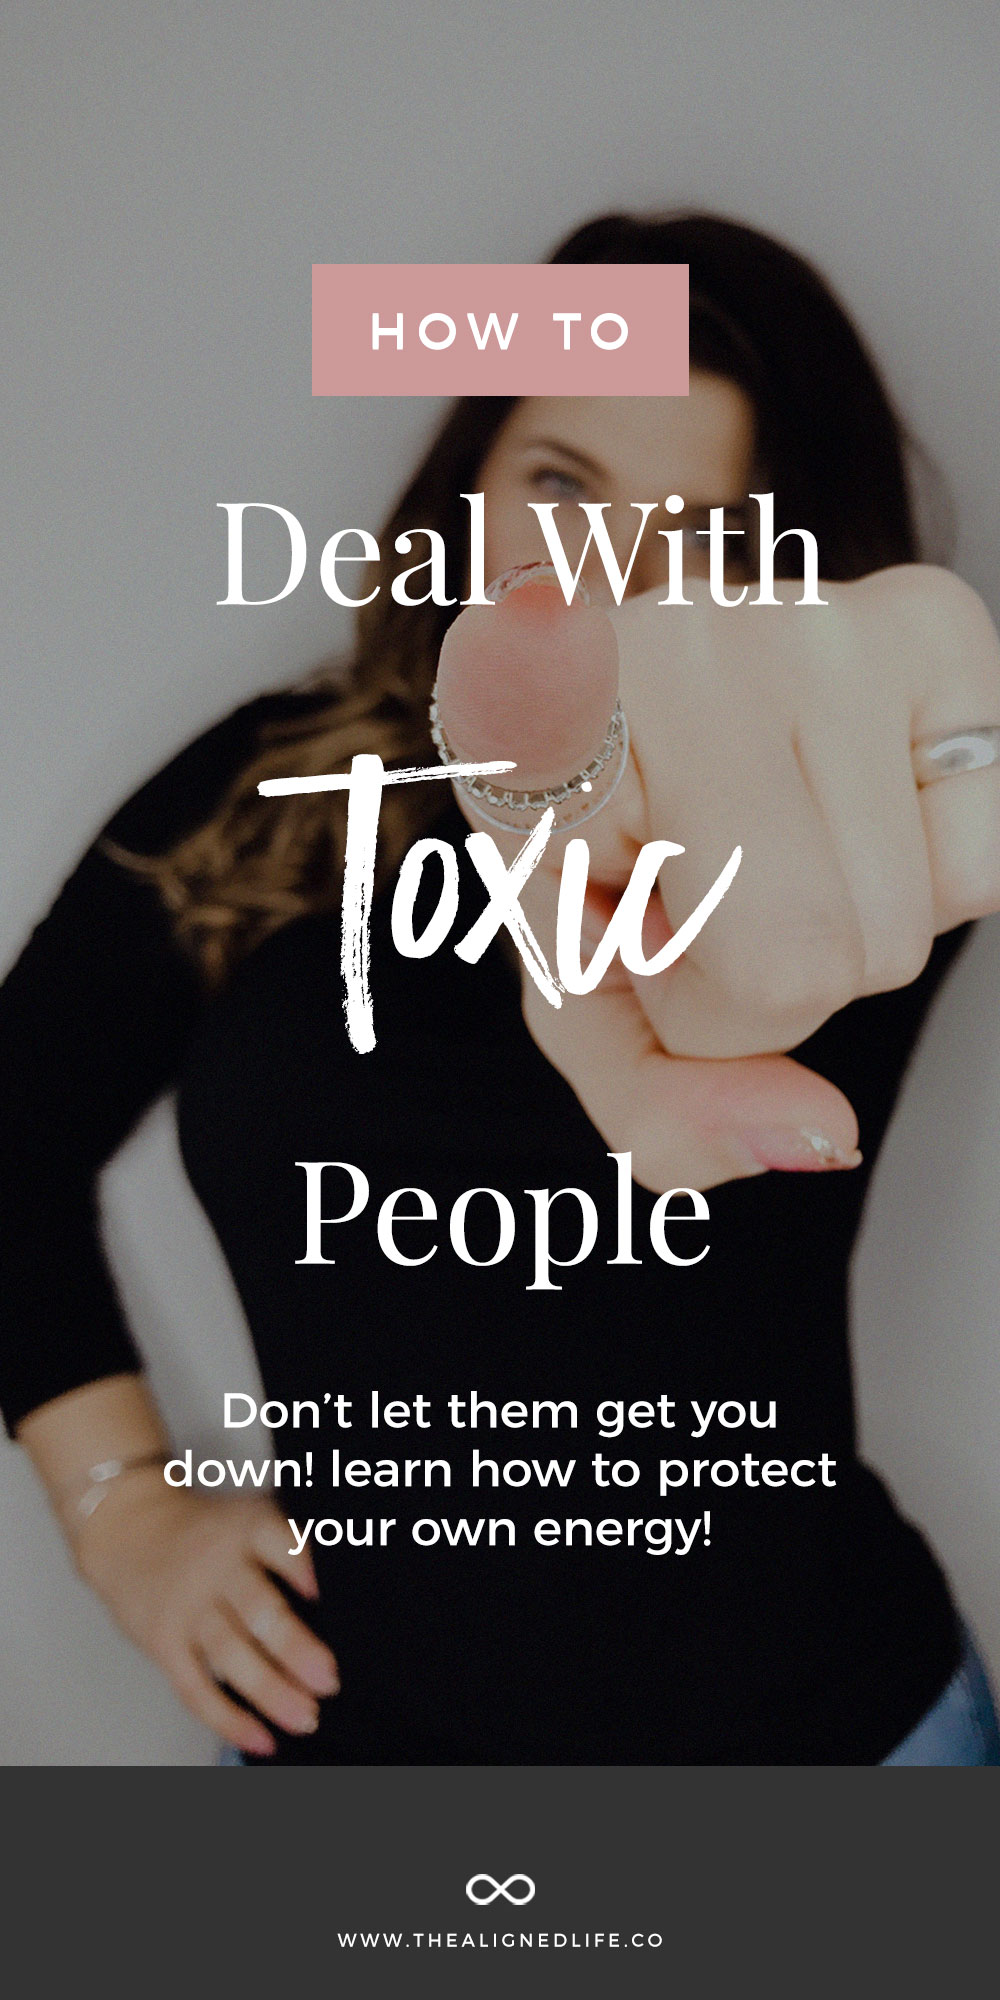 How To Deal With Toxic People